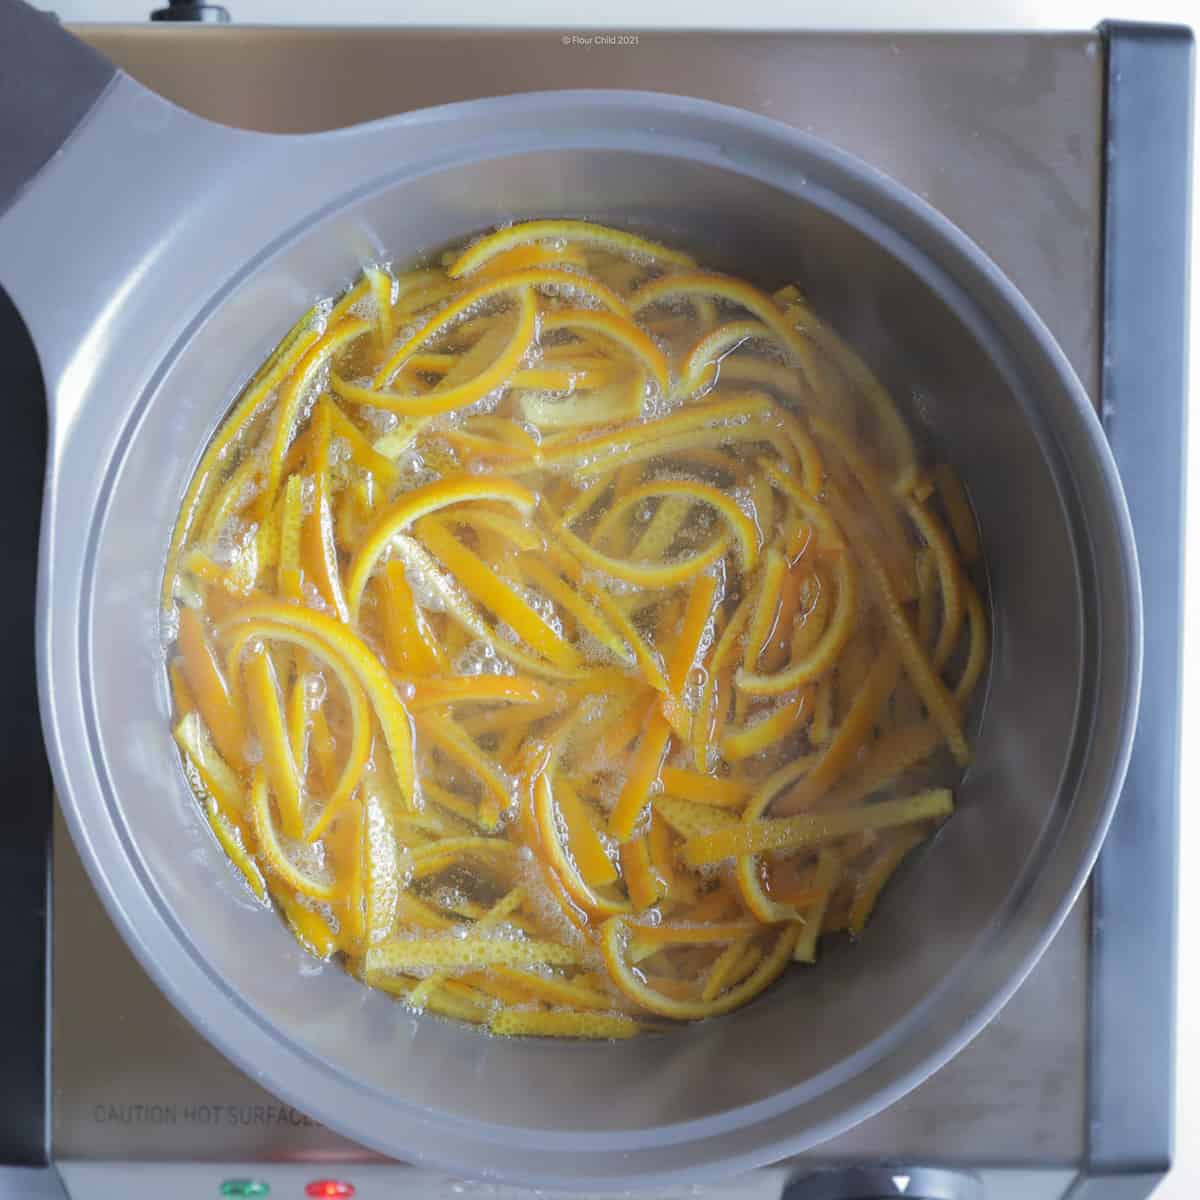 Orange peel resting in sugar and vanilla before removal to cooling rack